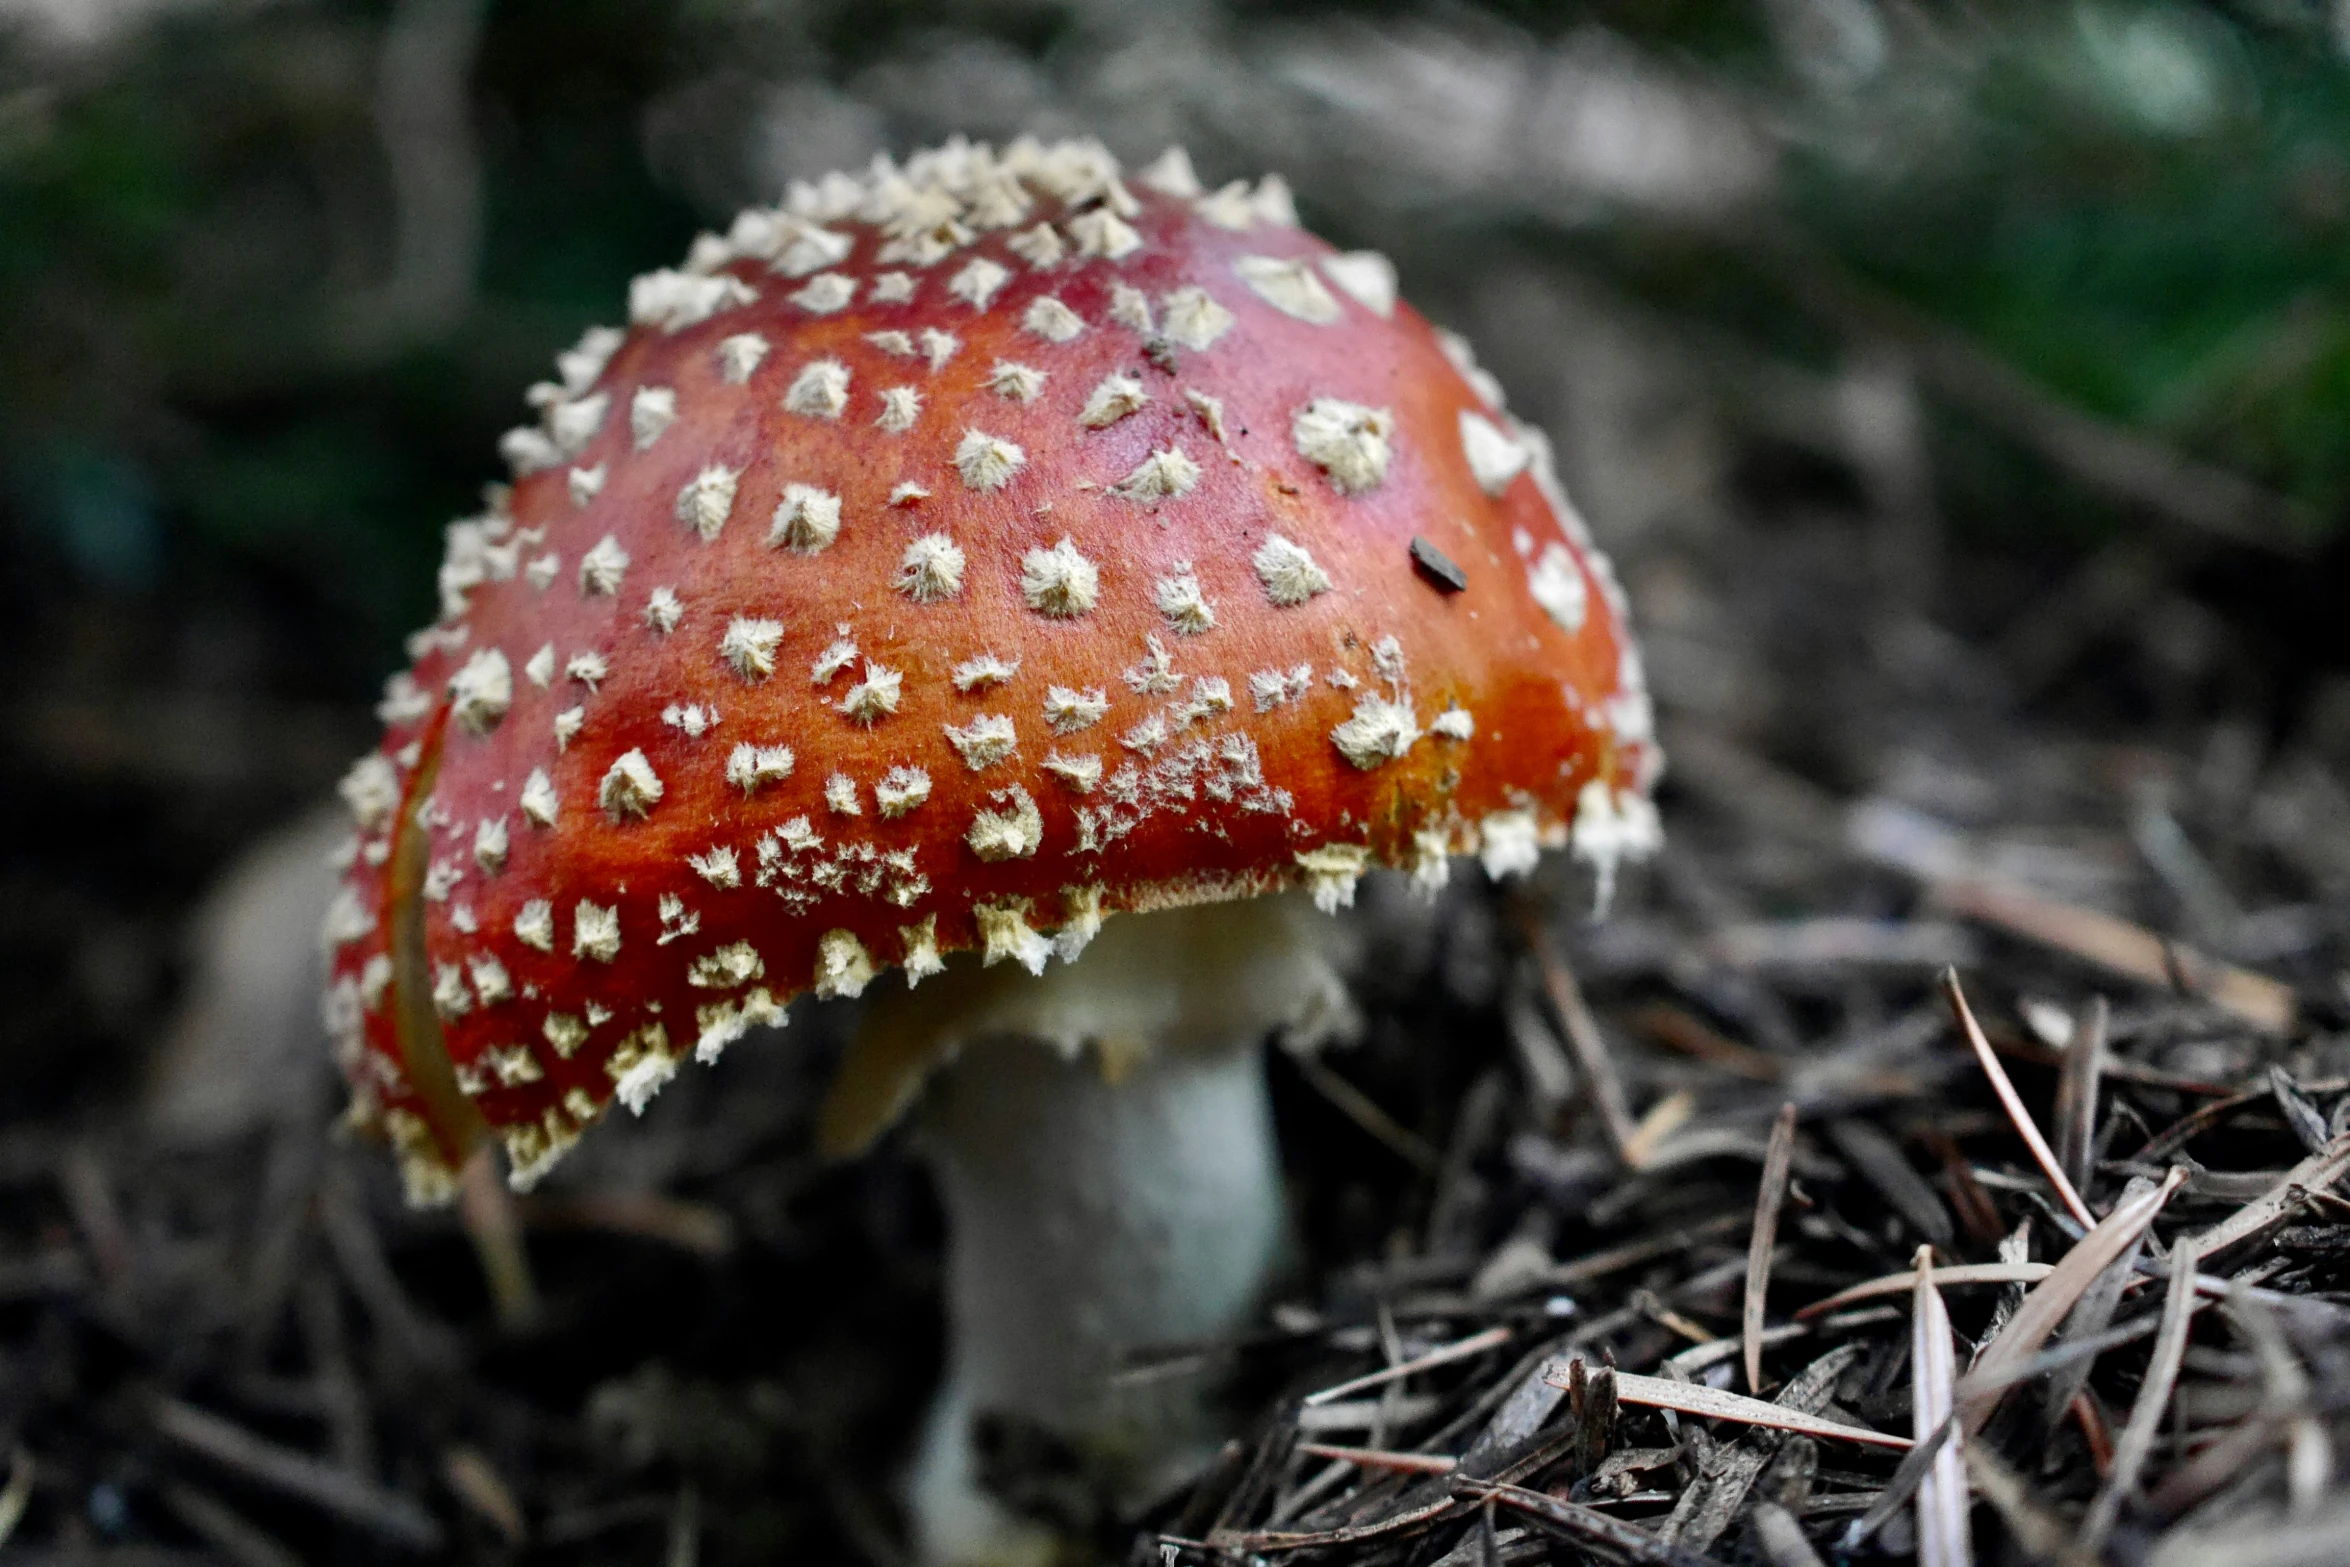 there is a red mushroom with white spots on it